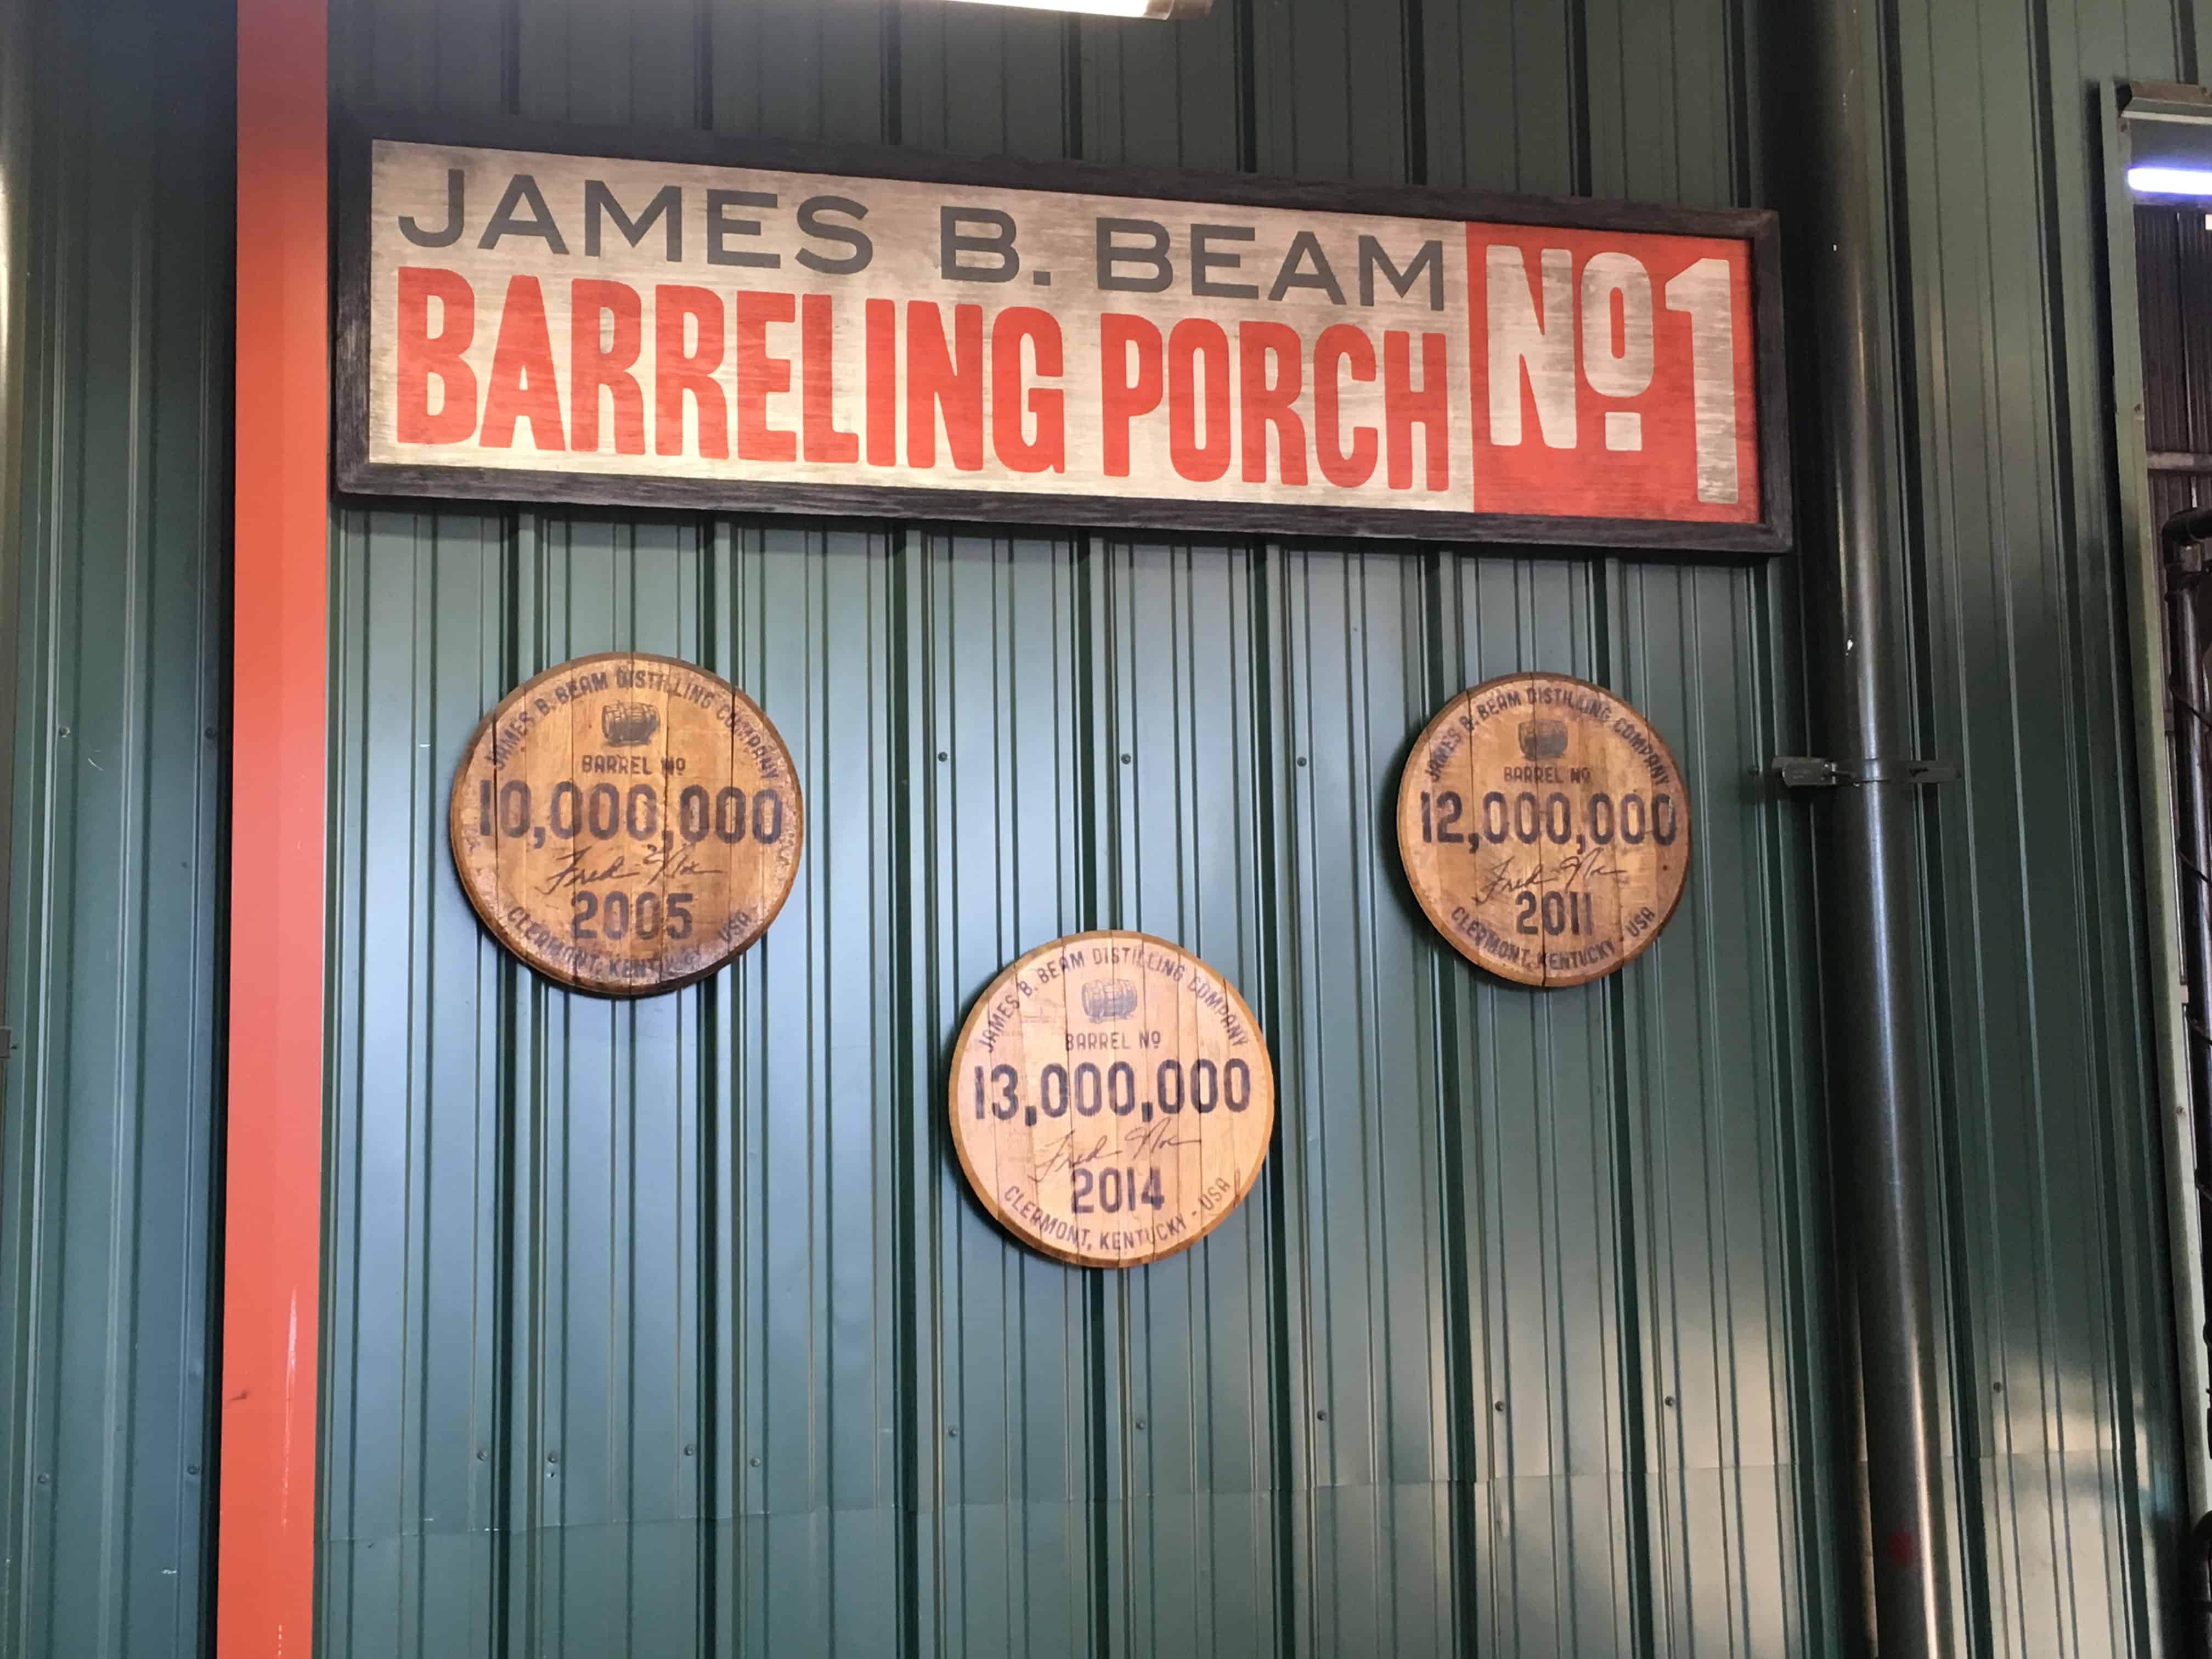 Barreling porch at Jim Beam American Stillhouse in Clermont, Kentucky